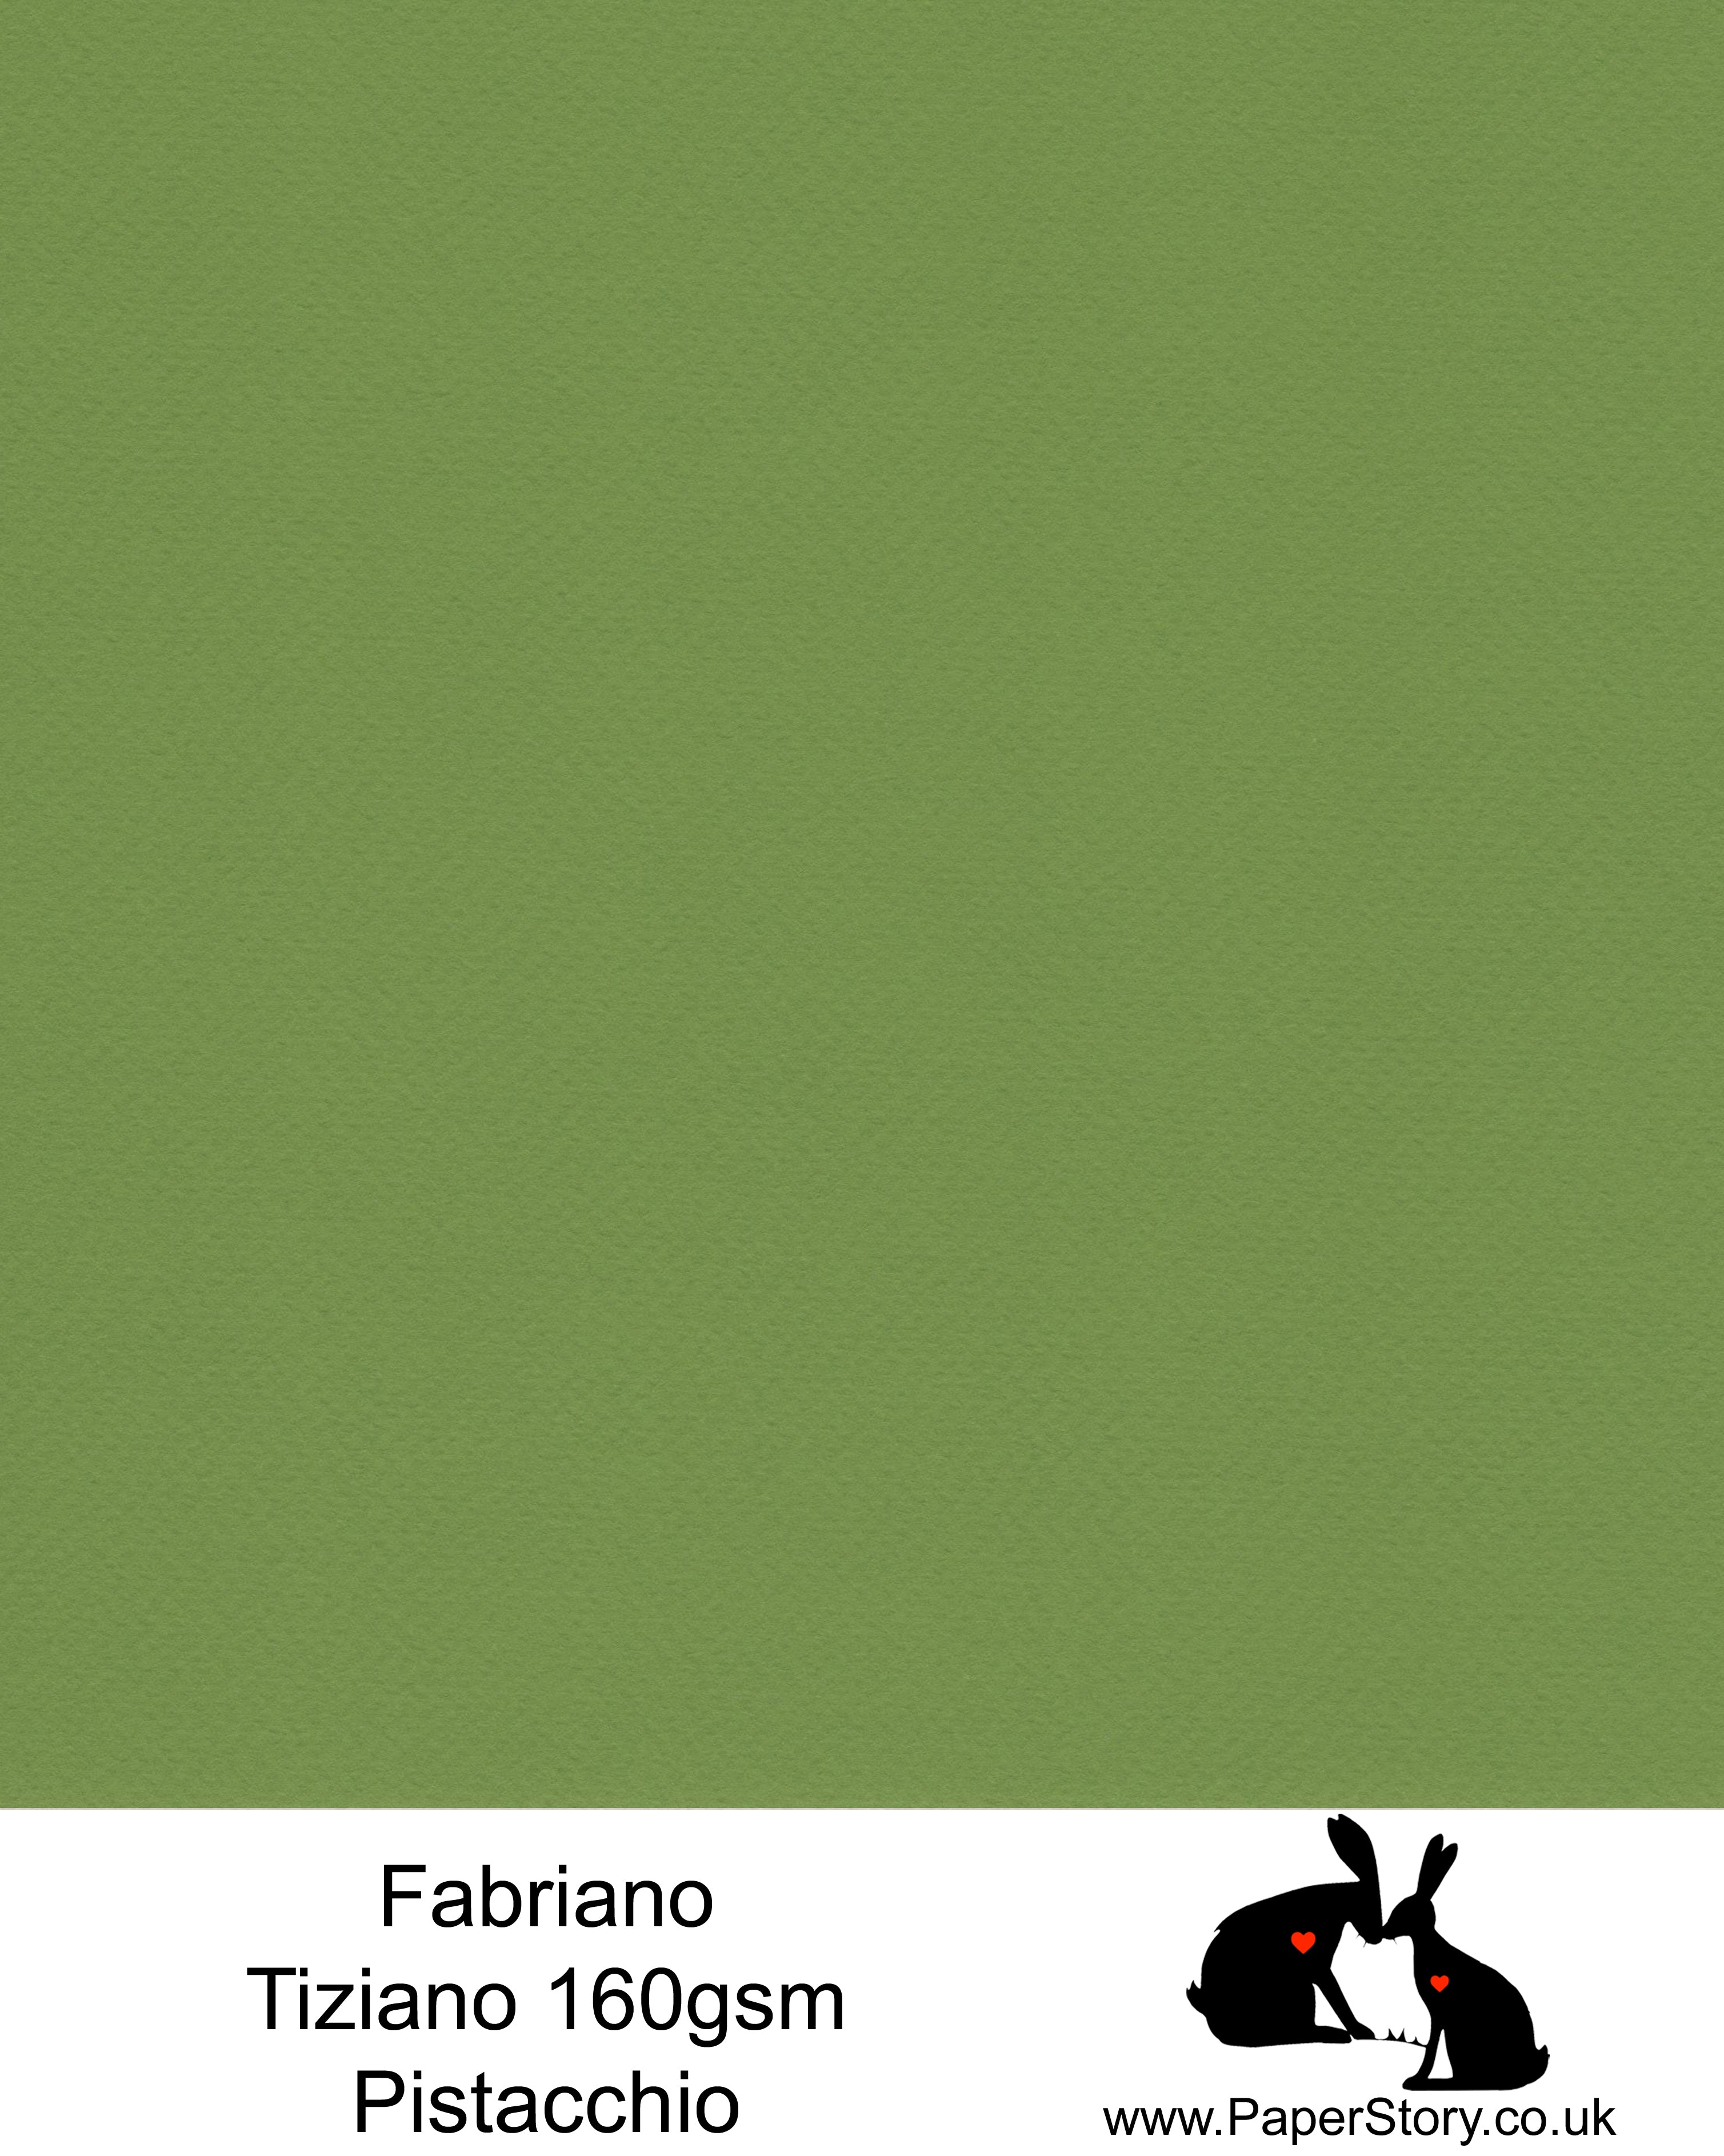 High quality paper from Italy, Pistachio super green Fabriano Tiziano is 160 gsm, Tiziano has a high cotton content, a textured naturally sized surface. This paper is acid free to guarantee long permanence in time, pH neutral. It has highly lightfast colours, an excellent surface making and sizing which make this paper particularly suitable for papercutting, pastels, pencil, graphite, charcoal, tempera, air brush and watercolour techniques. Tiziano can be used for all printing techniques.